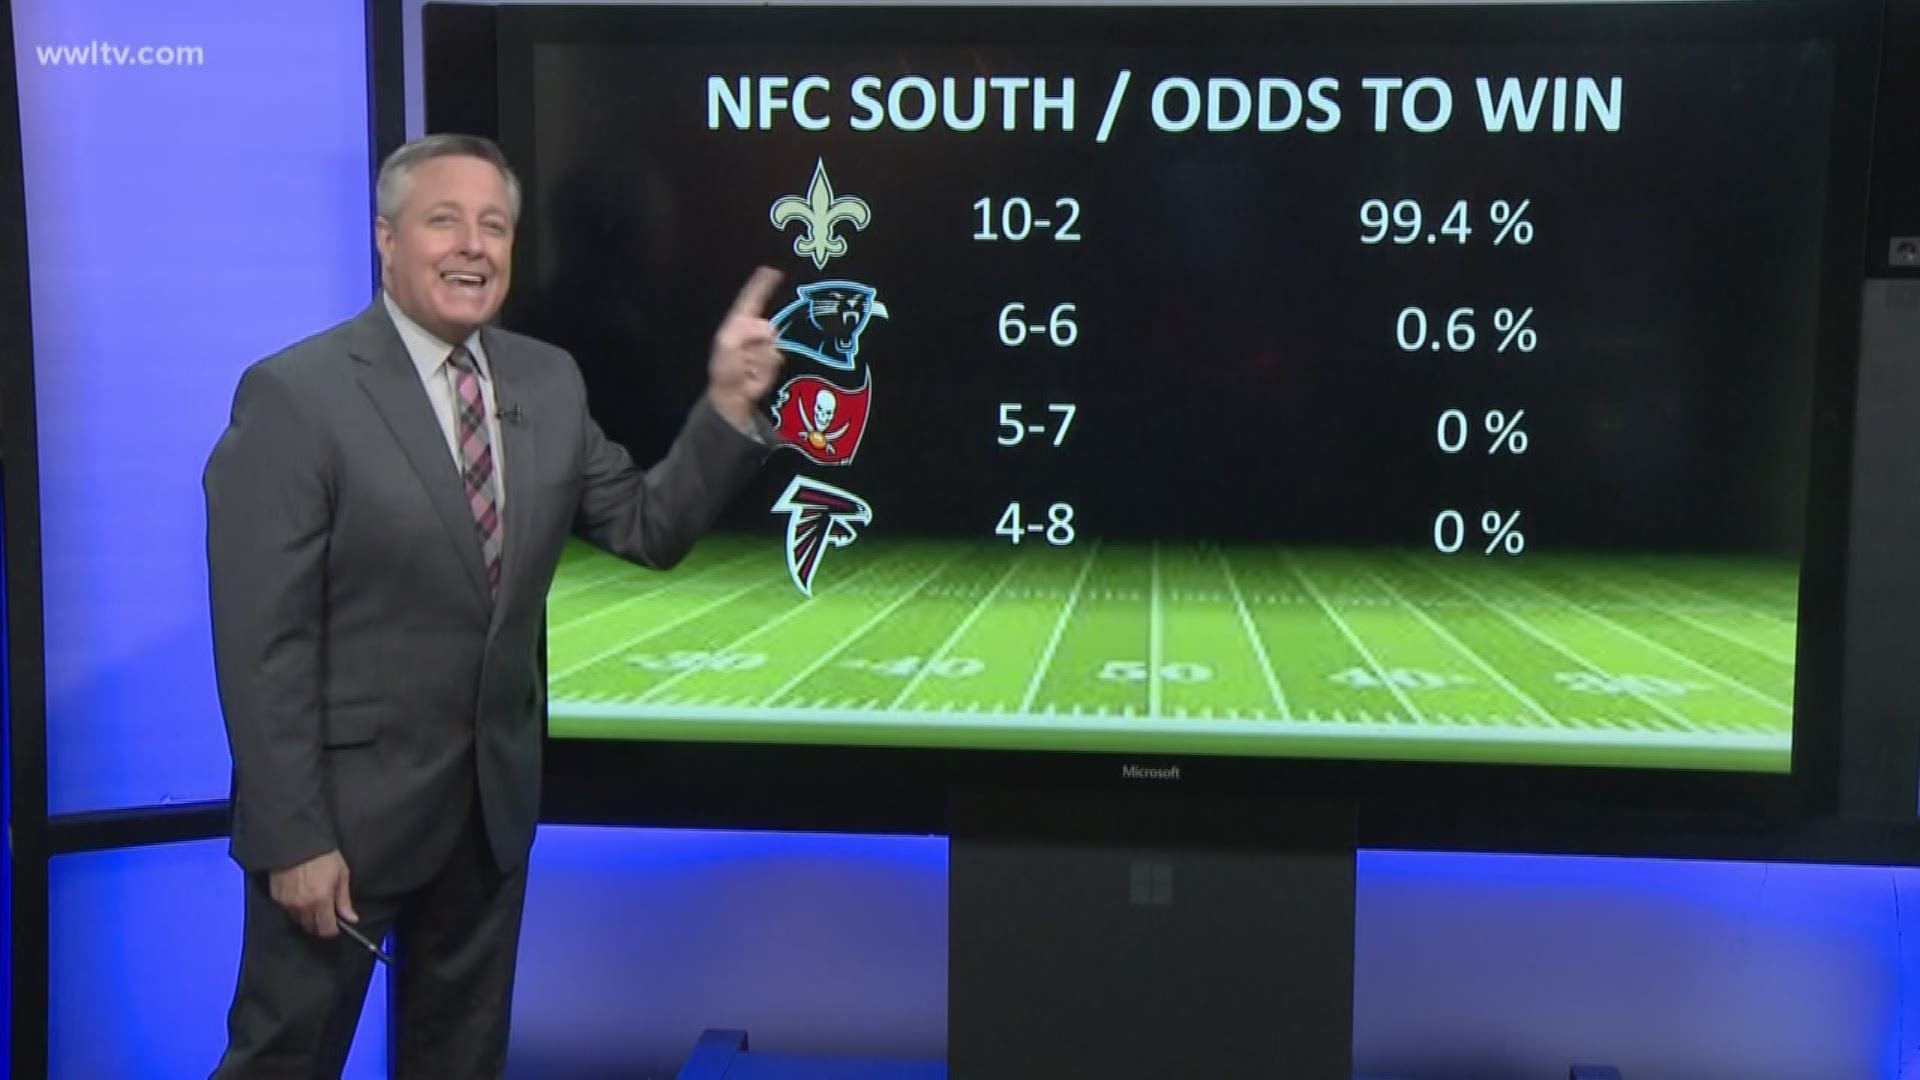 Where will the Saints' land in the playoffs this year? Doug Mouton explains why they've got such good odds of getting a top-2 seed.